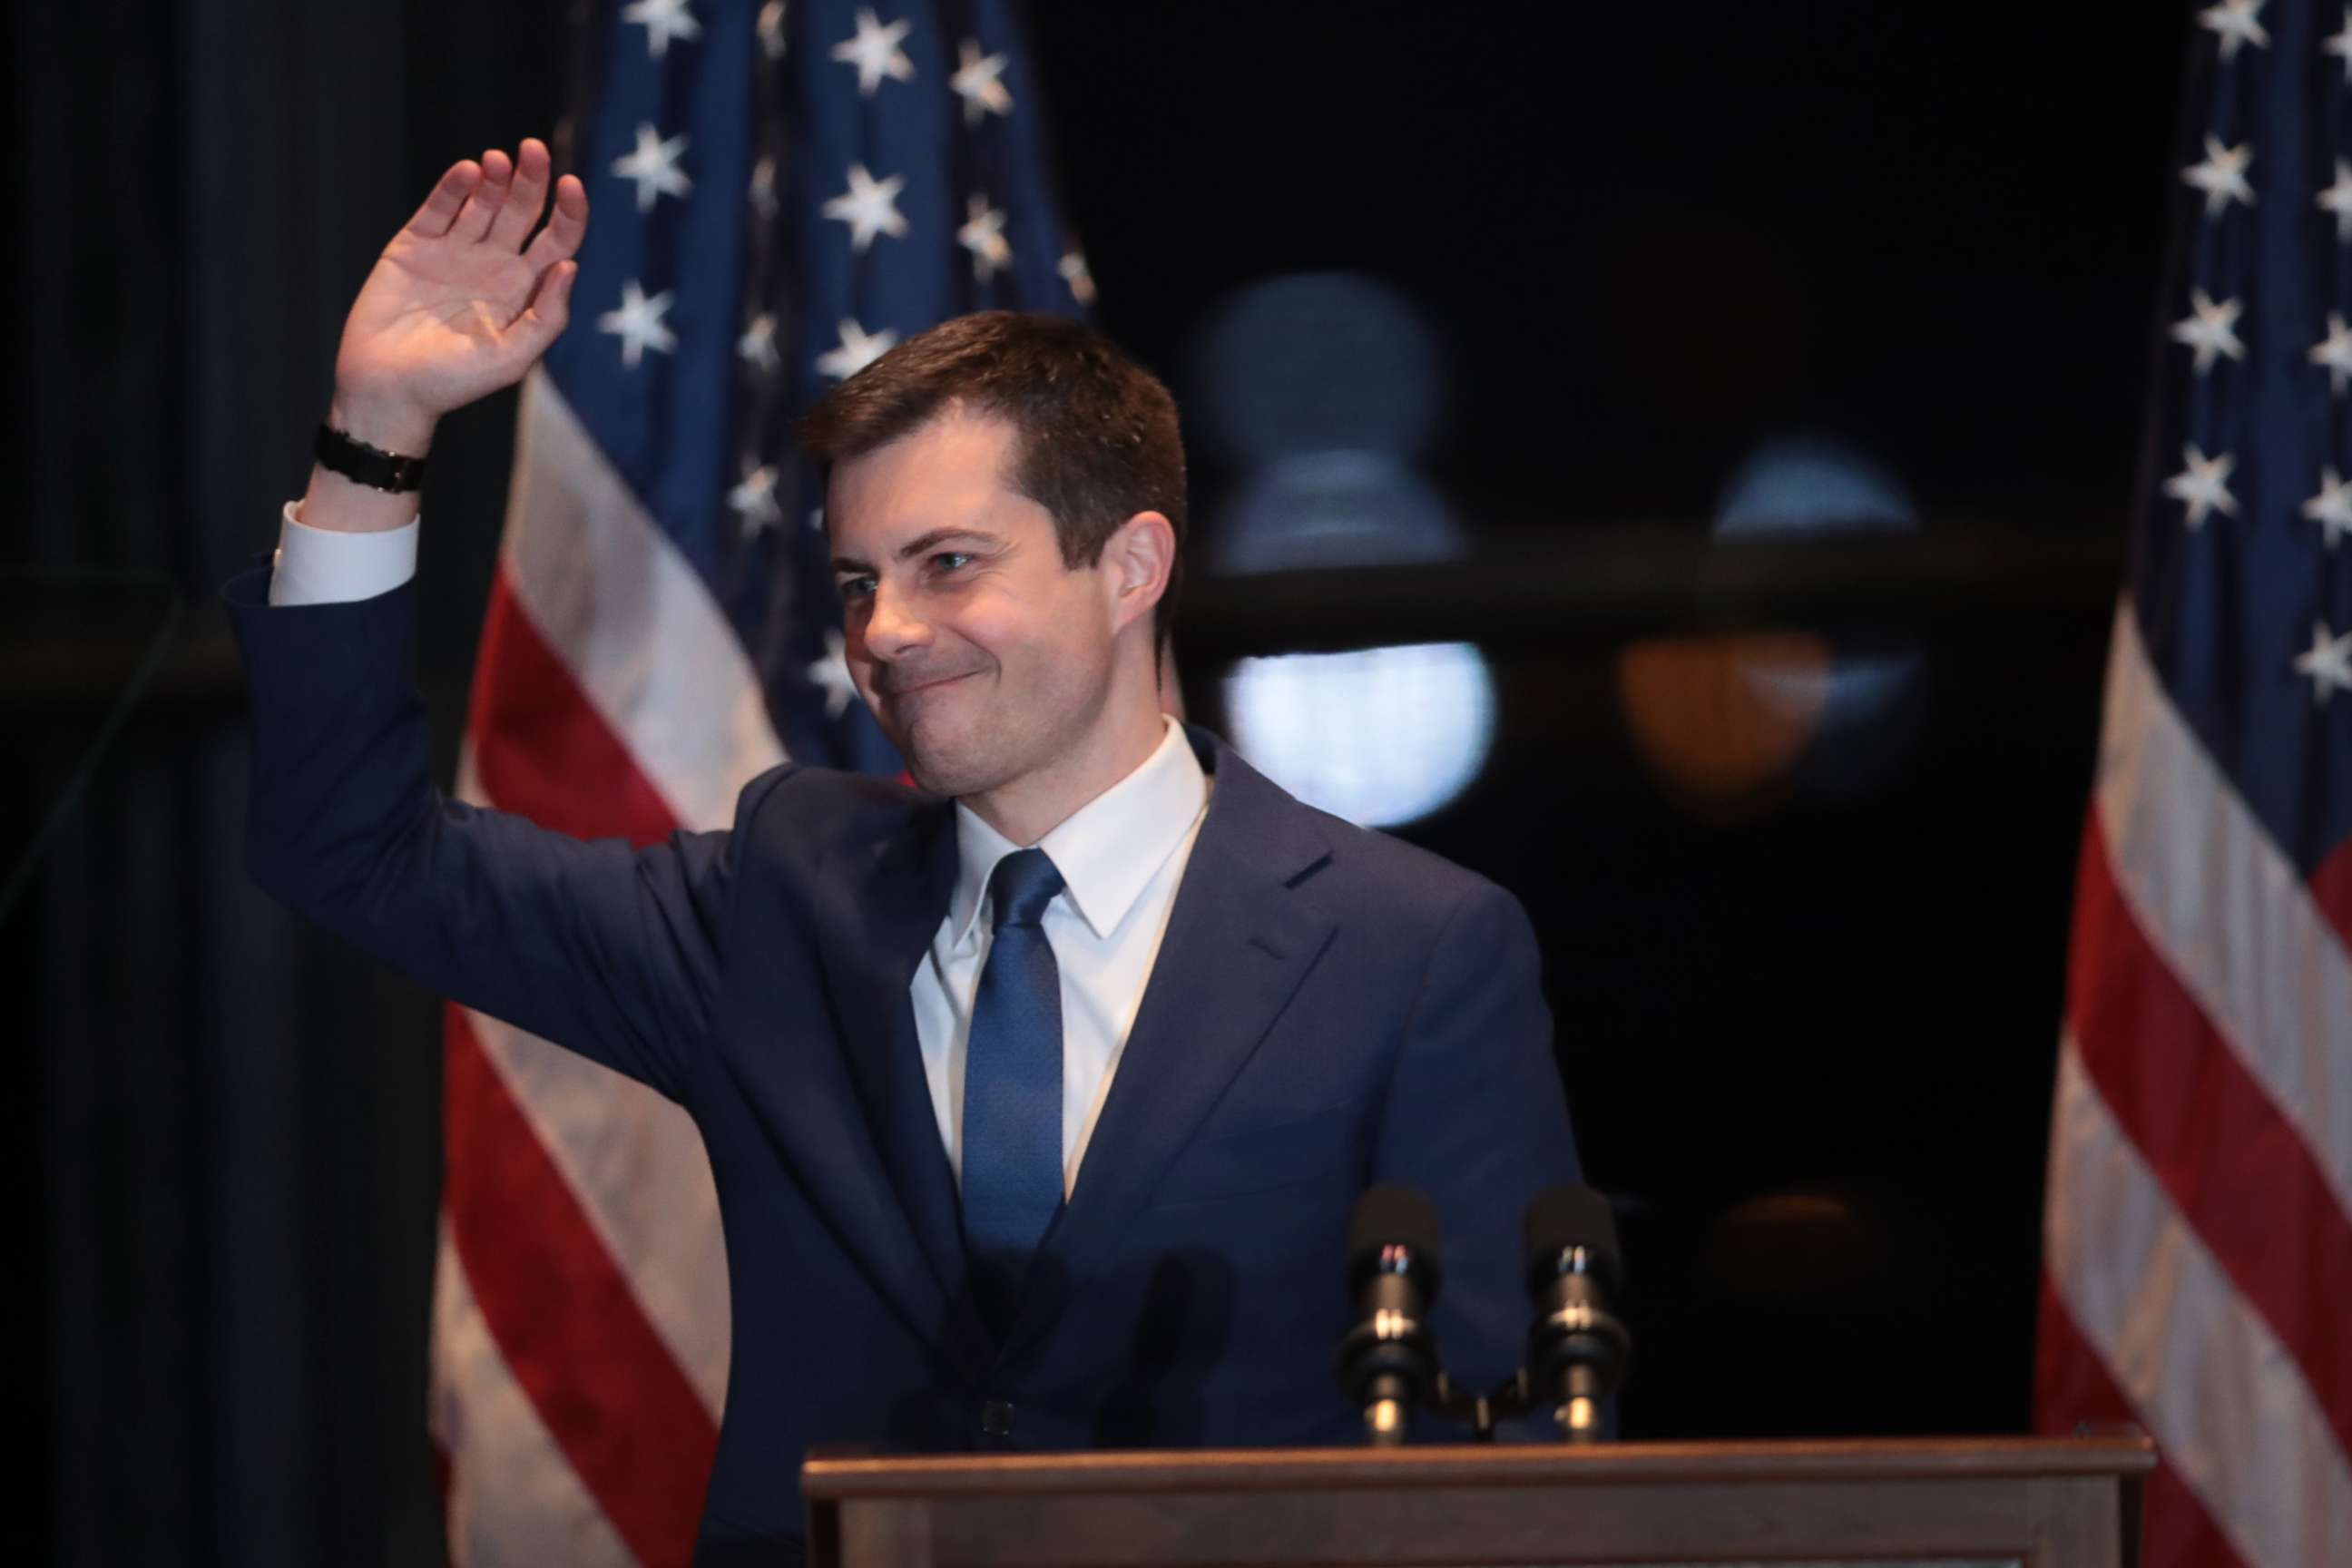 PHOTO: Former South Bend, Indiana Mayor Pete Buttigieg announces he is ending his campaign to be the Democratic nominee for president during a speech at the Century Center on March 01, 2020 in South Bend, Indiana. 